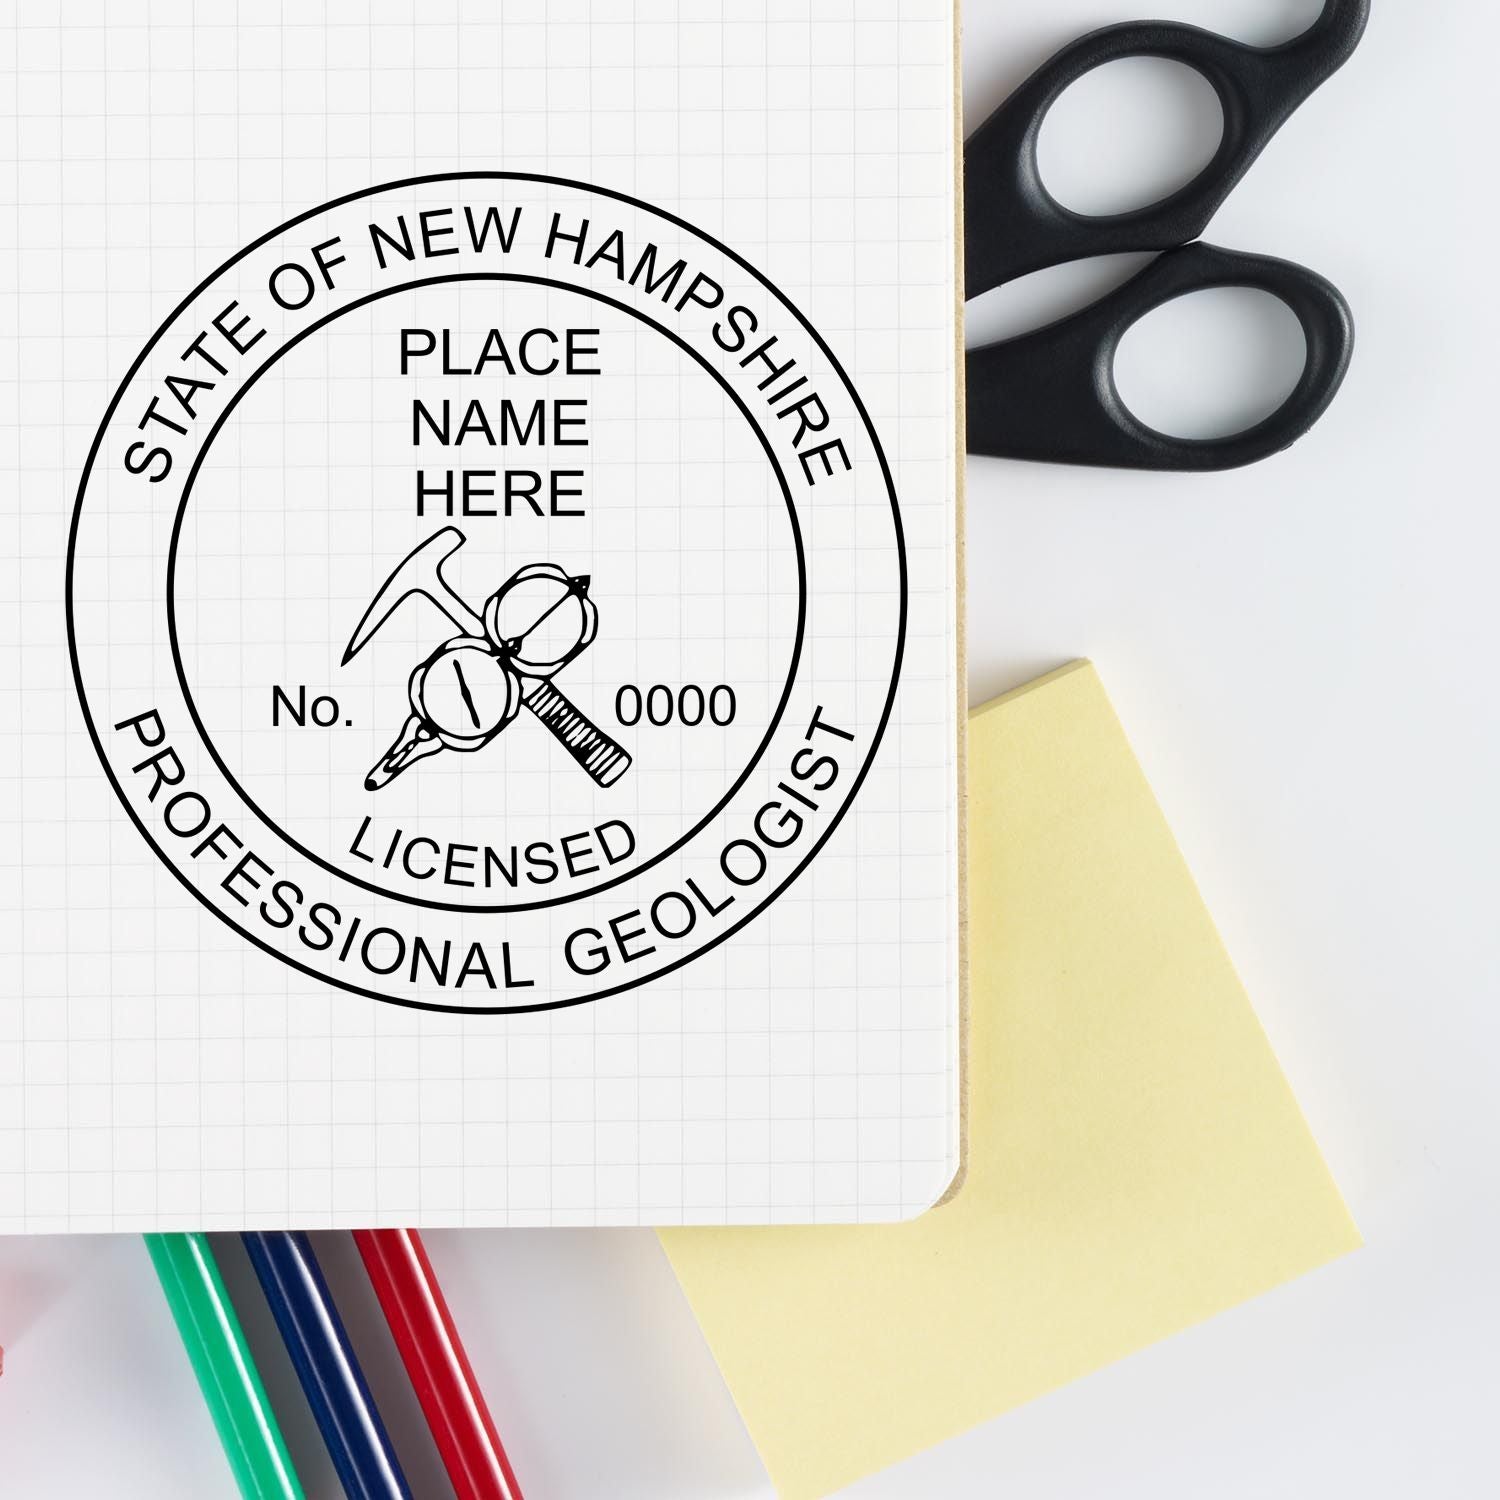 The main image for the Slim Pre-Inked New Hampshire Professional Geologist Seal Stamp depicting a sample of the imprint and imprint sample